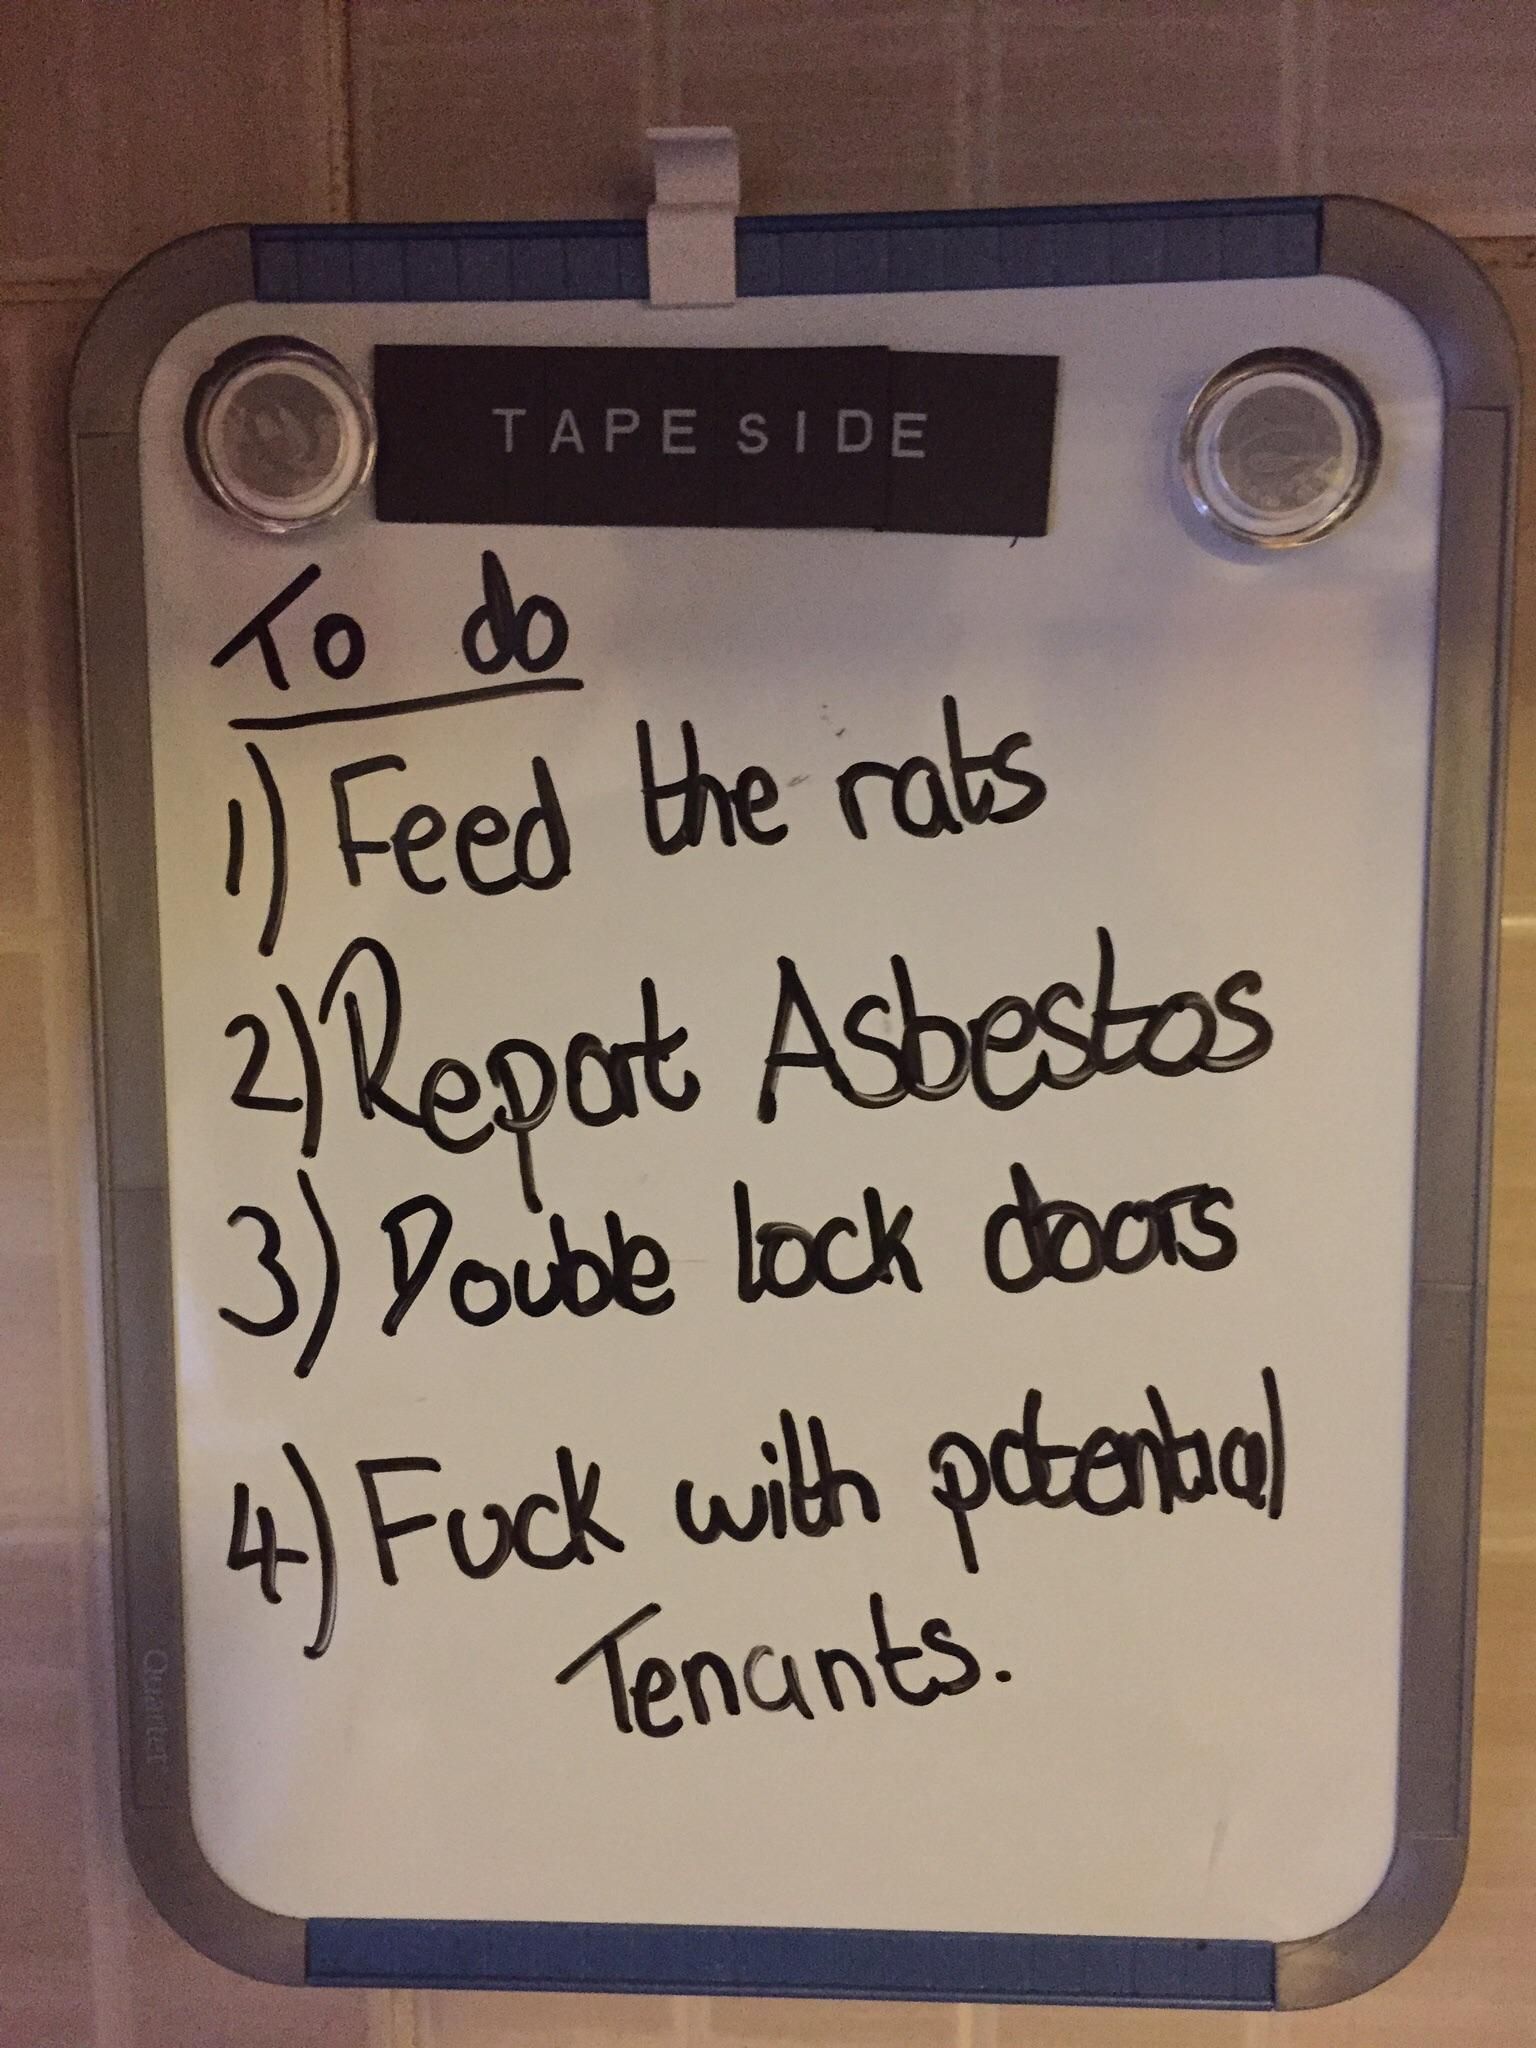 Spotted during a flat viewing in London